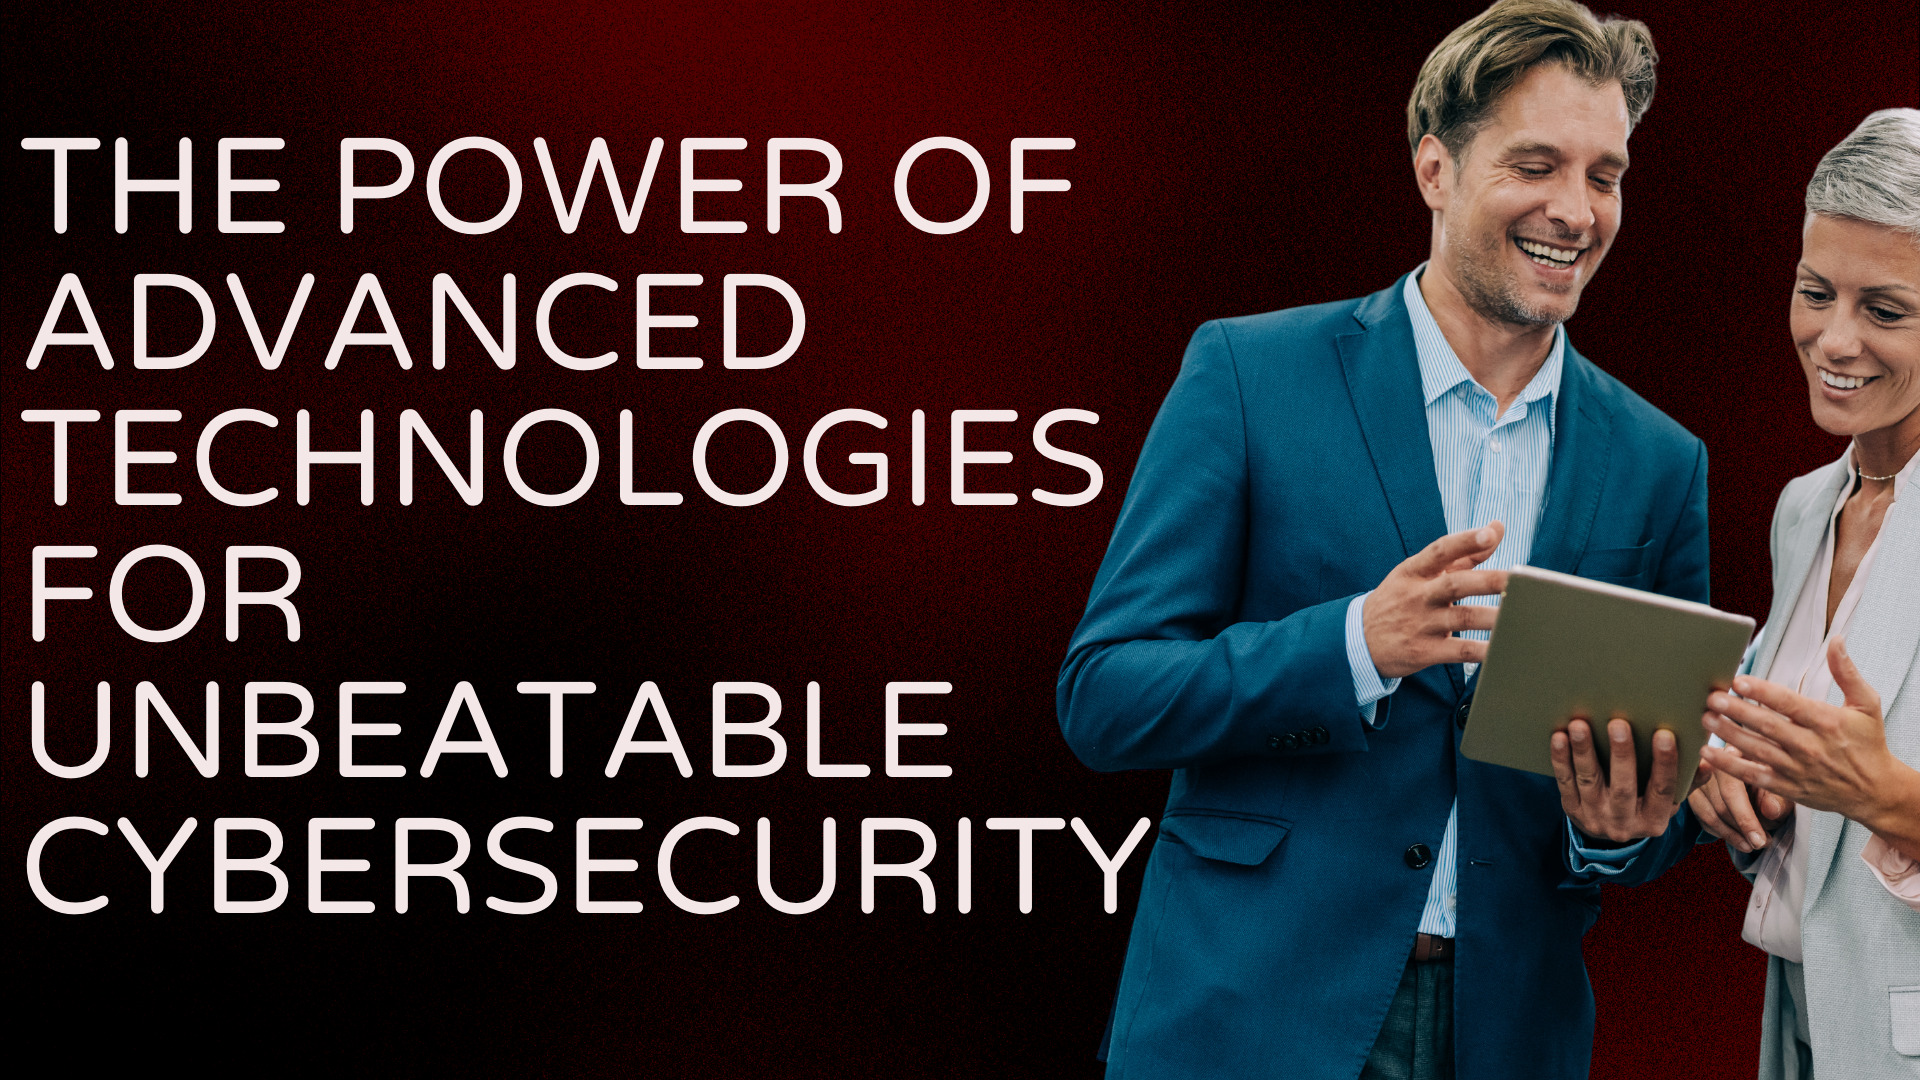 The Power of Advanced Technologies for Unbeatable Cybersecurity